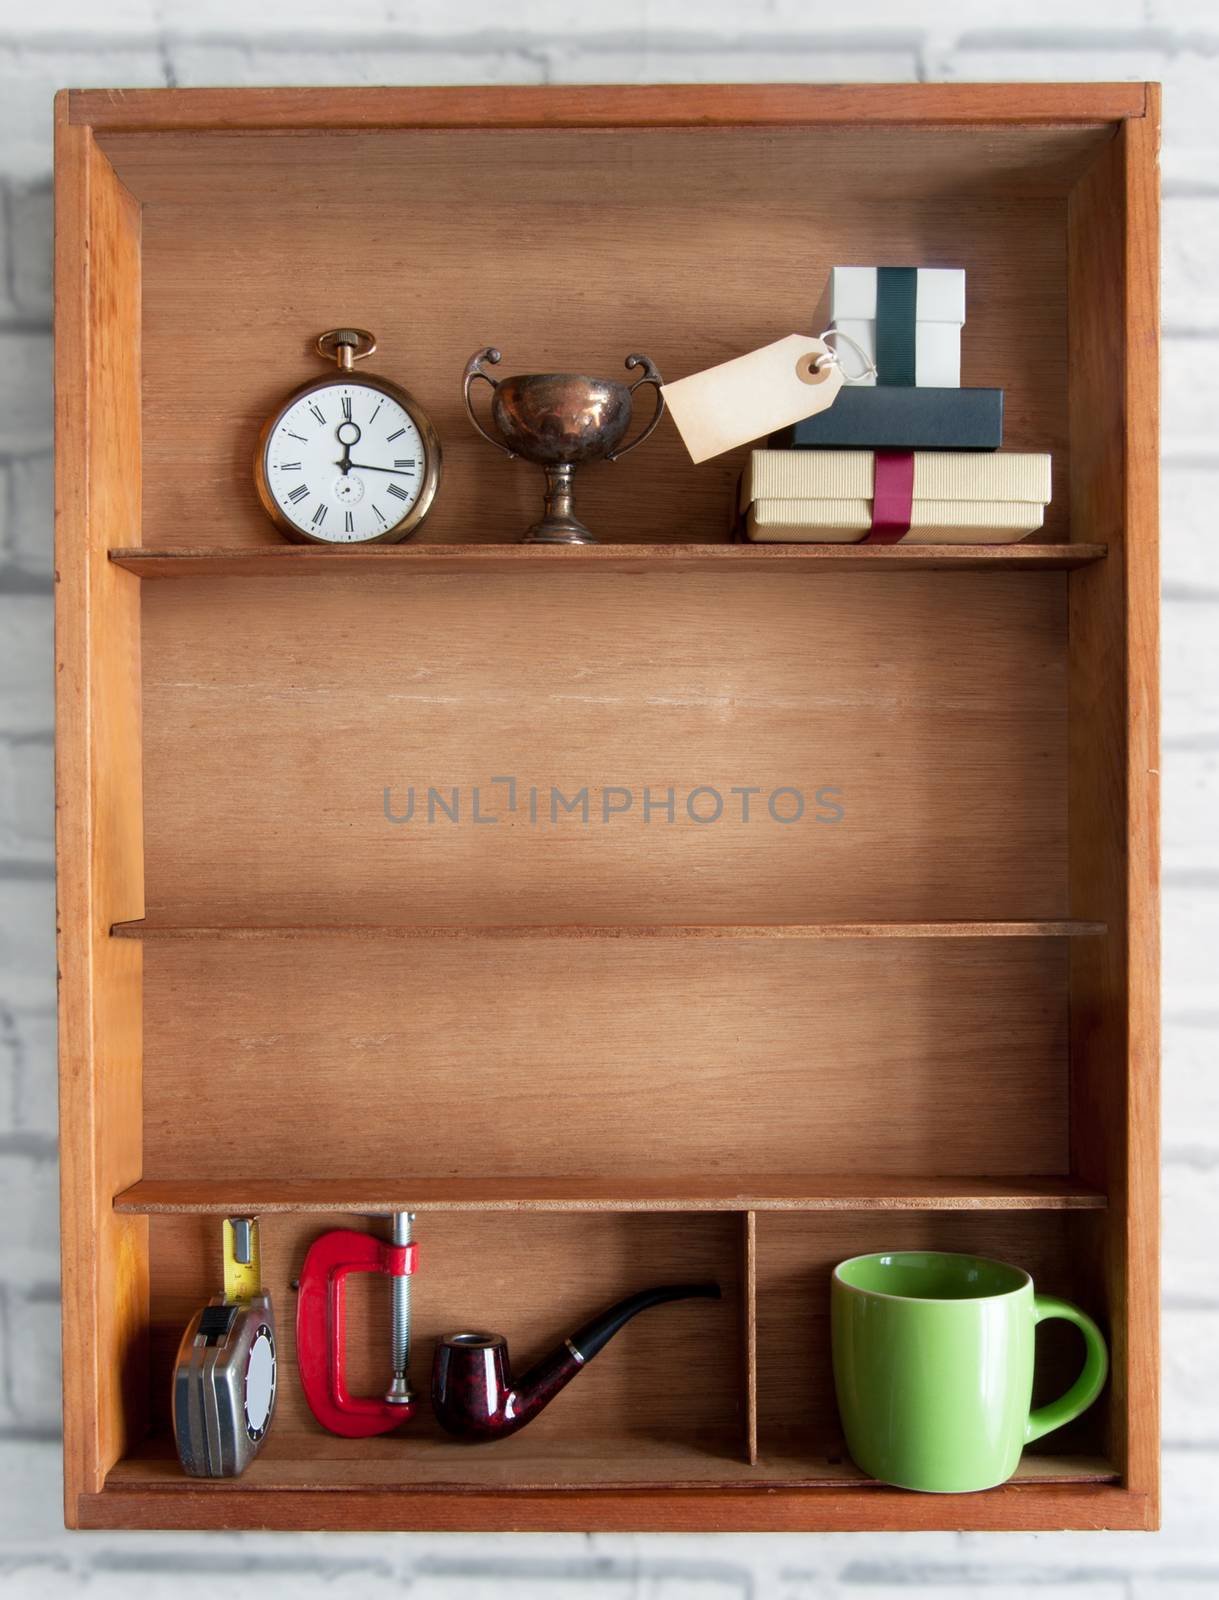 Fathers day gift with blank gift label inside a shelf with various objects including tools and coffee cup